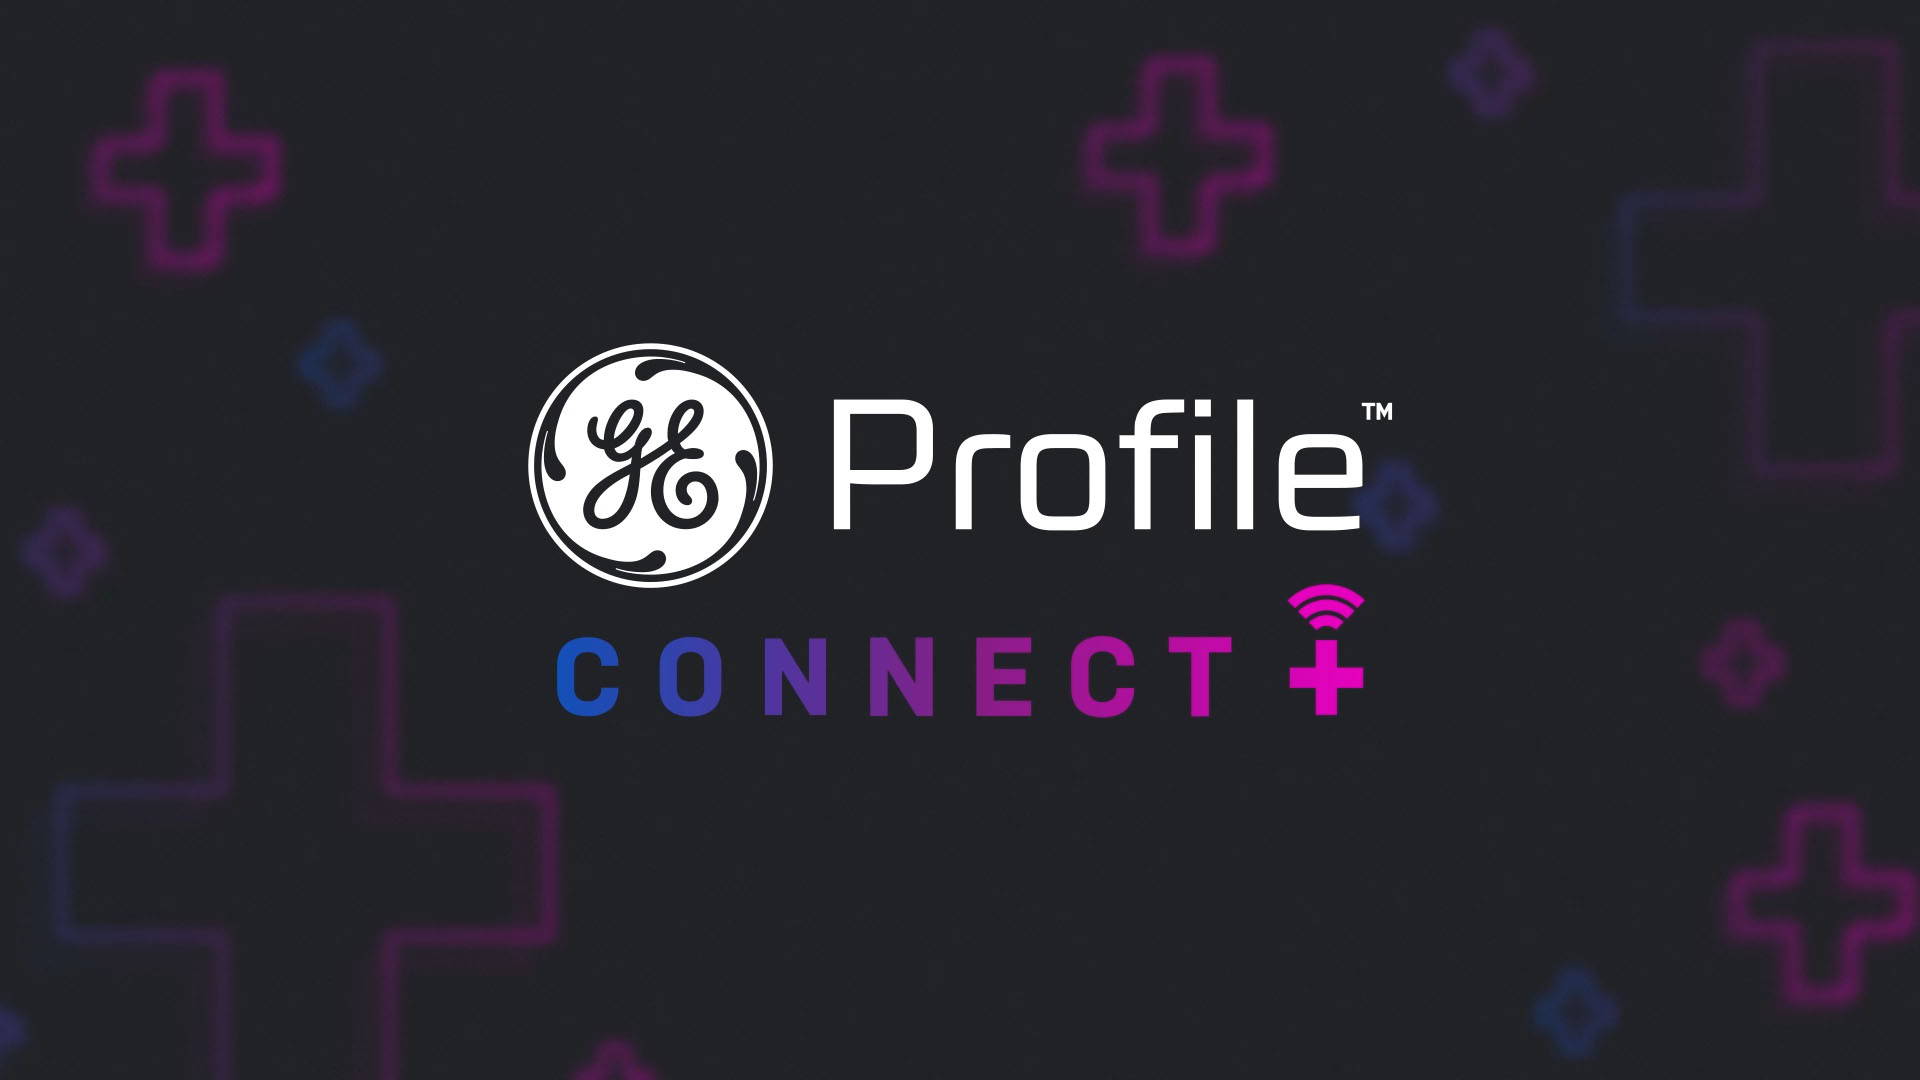 GE Partners With Google to Power Future Smart Home Devices